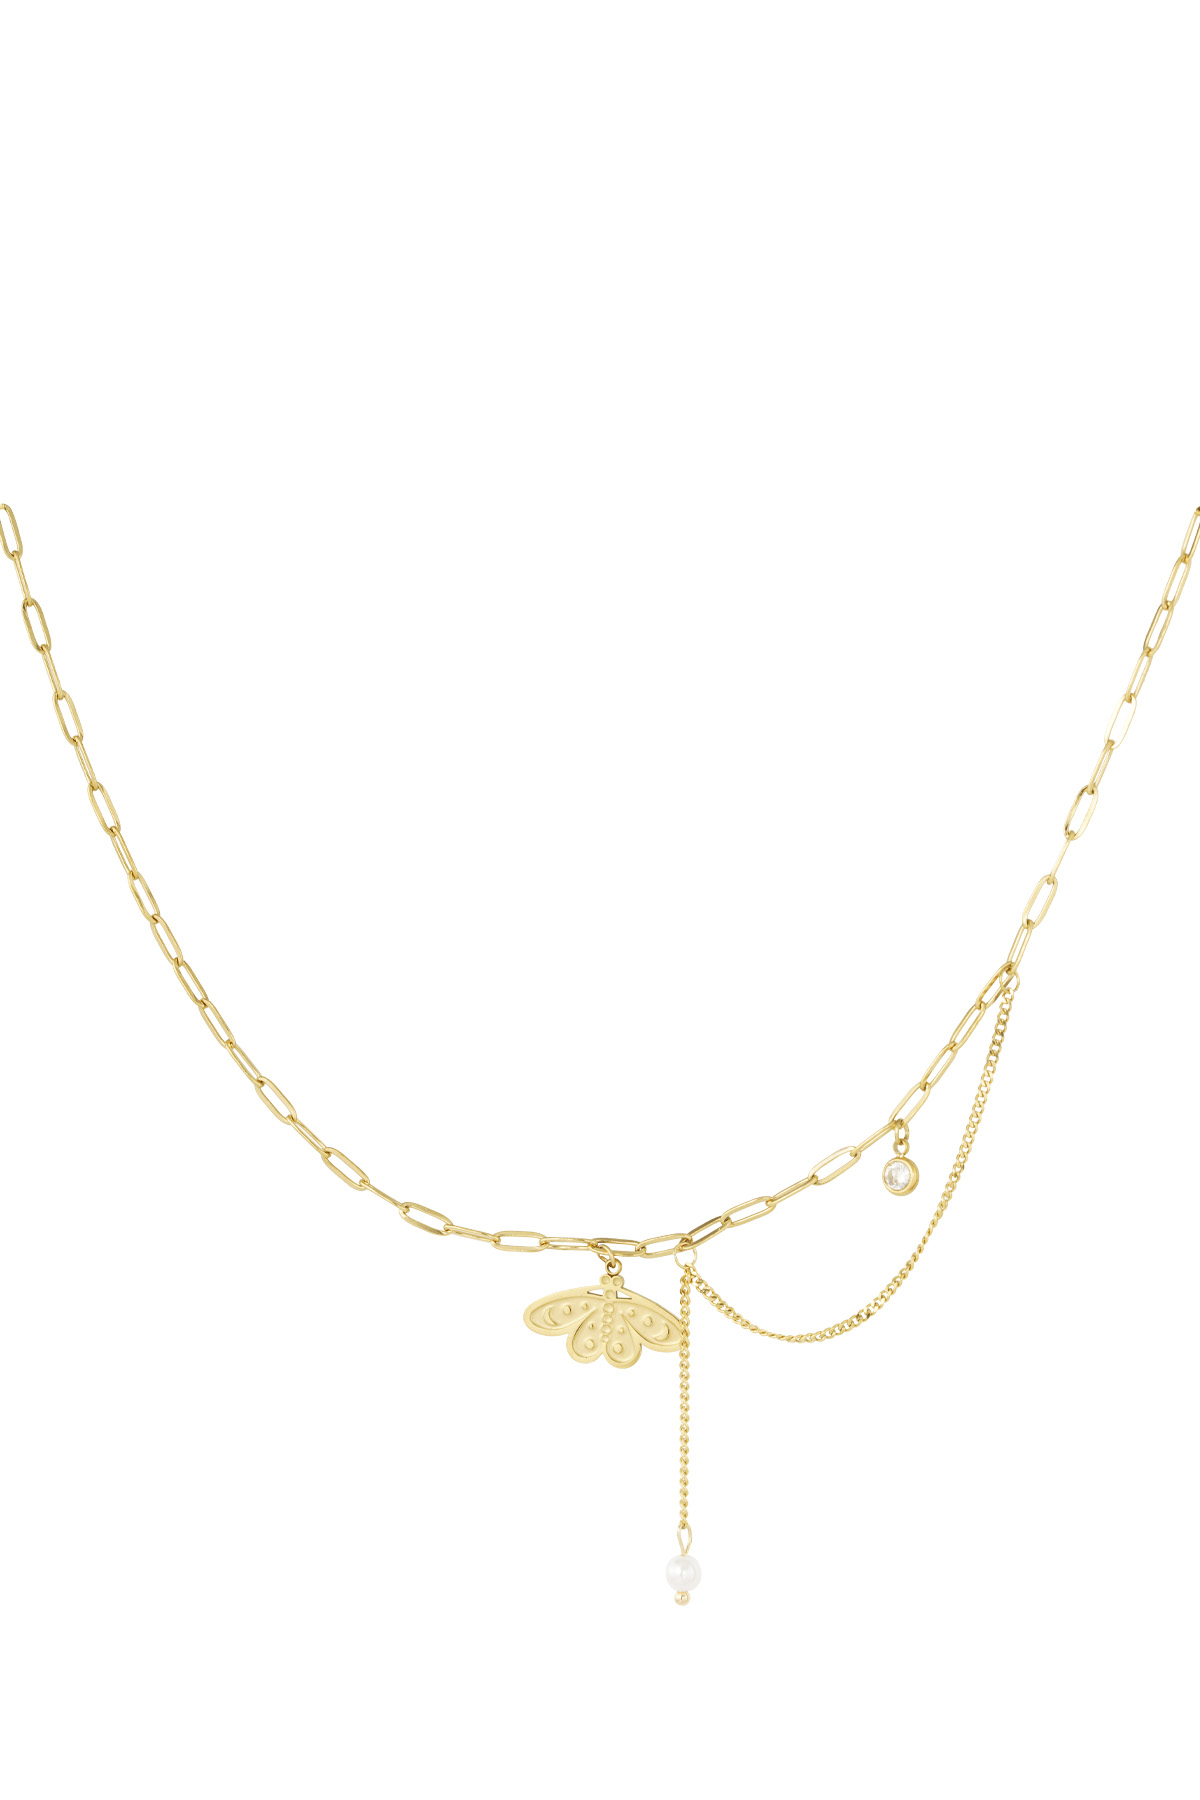 Butterfly charm necklace - gold